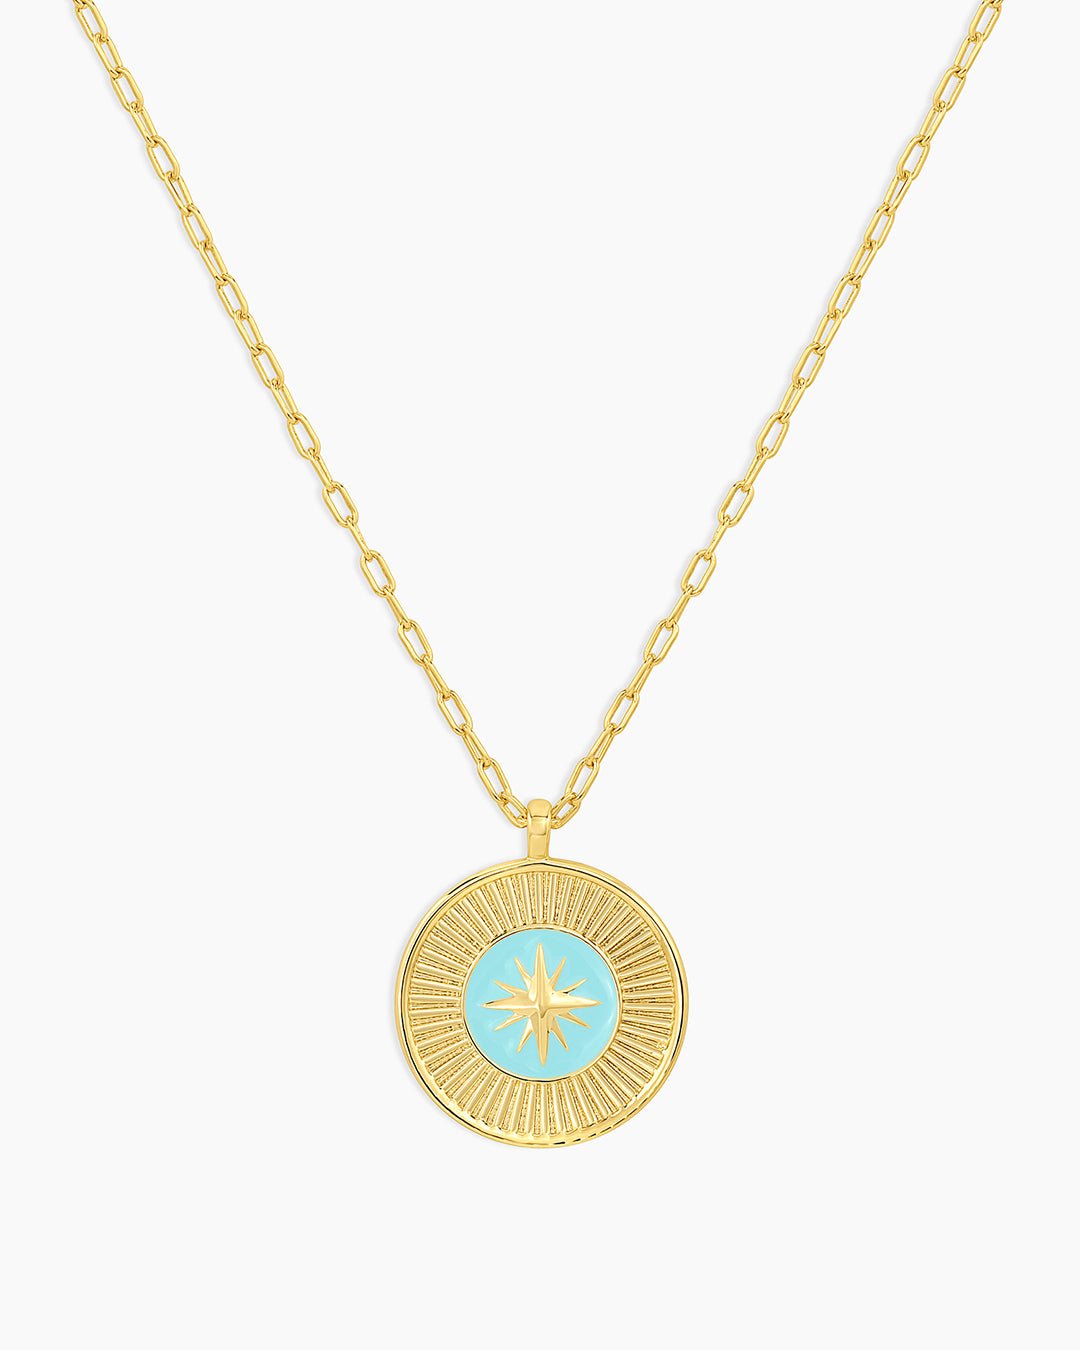  Compass Pendant Necklace || option::Gold Plated